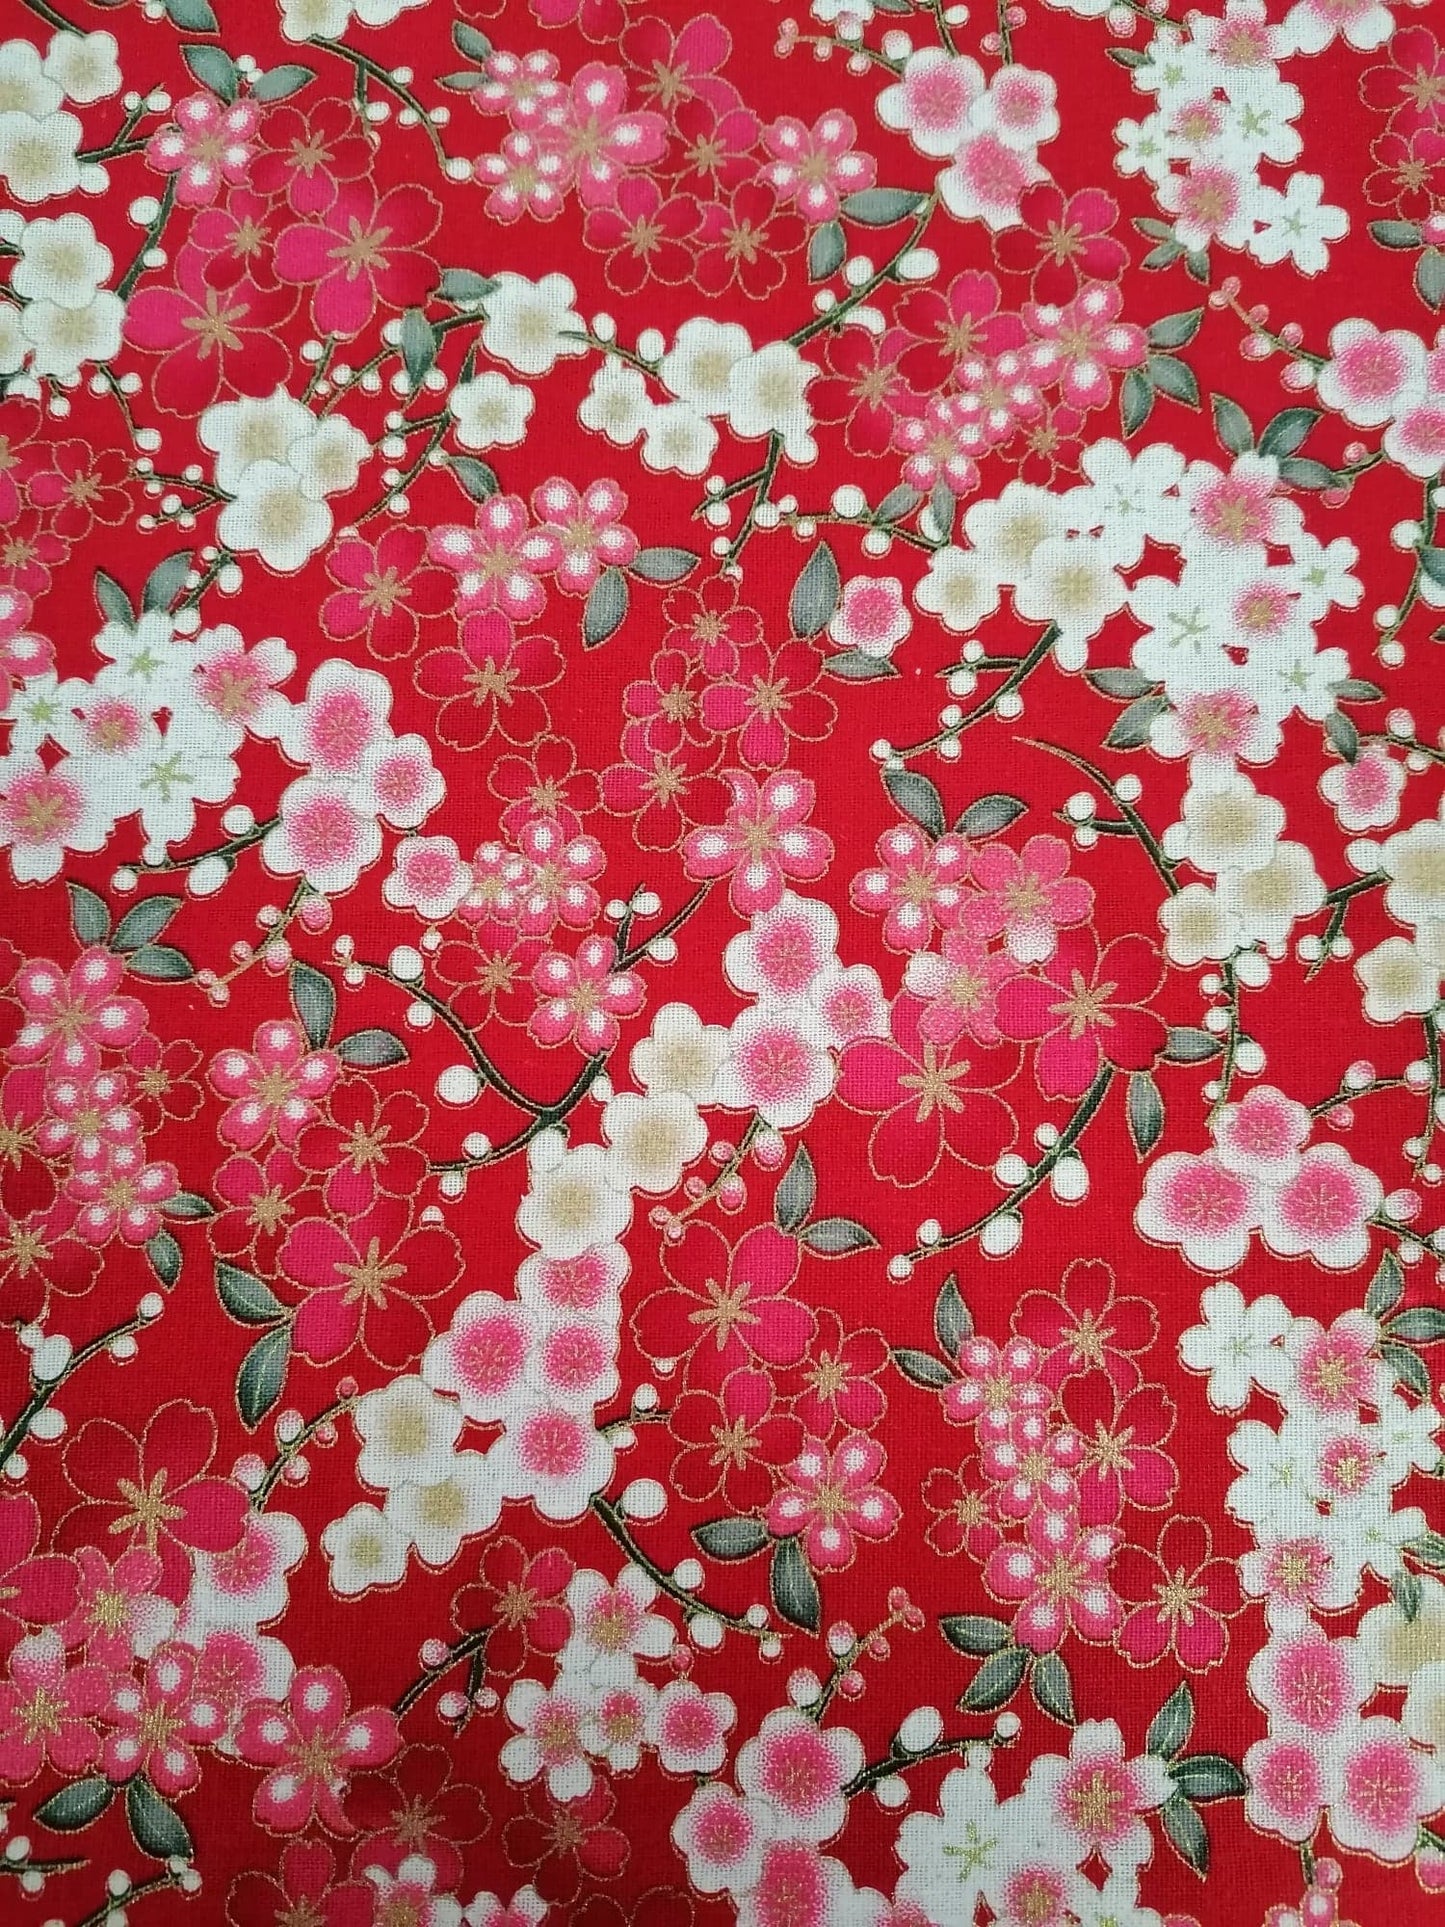 100% Cotton - Floral - Red/Green/Pink/Gold - 58" Wide - Sold By the Metre